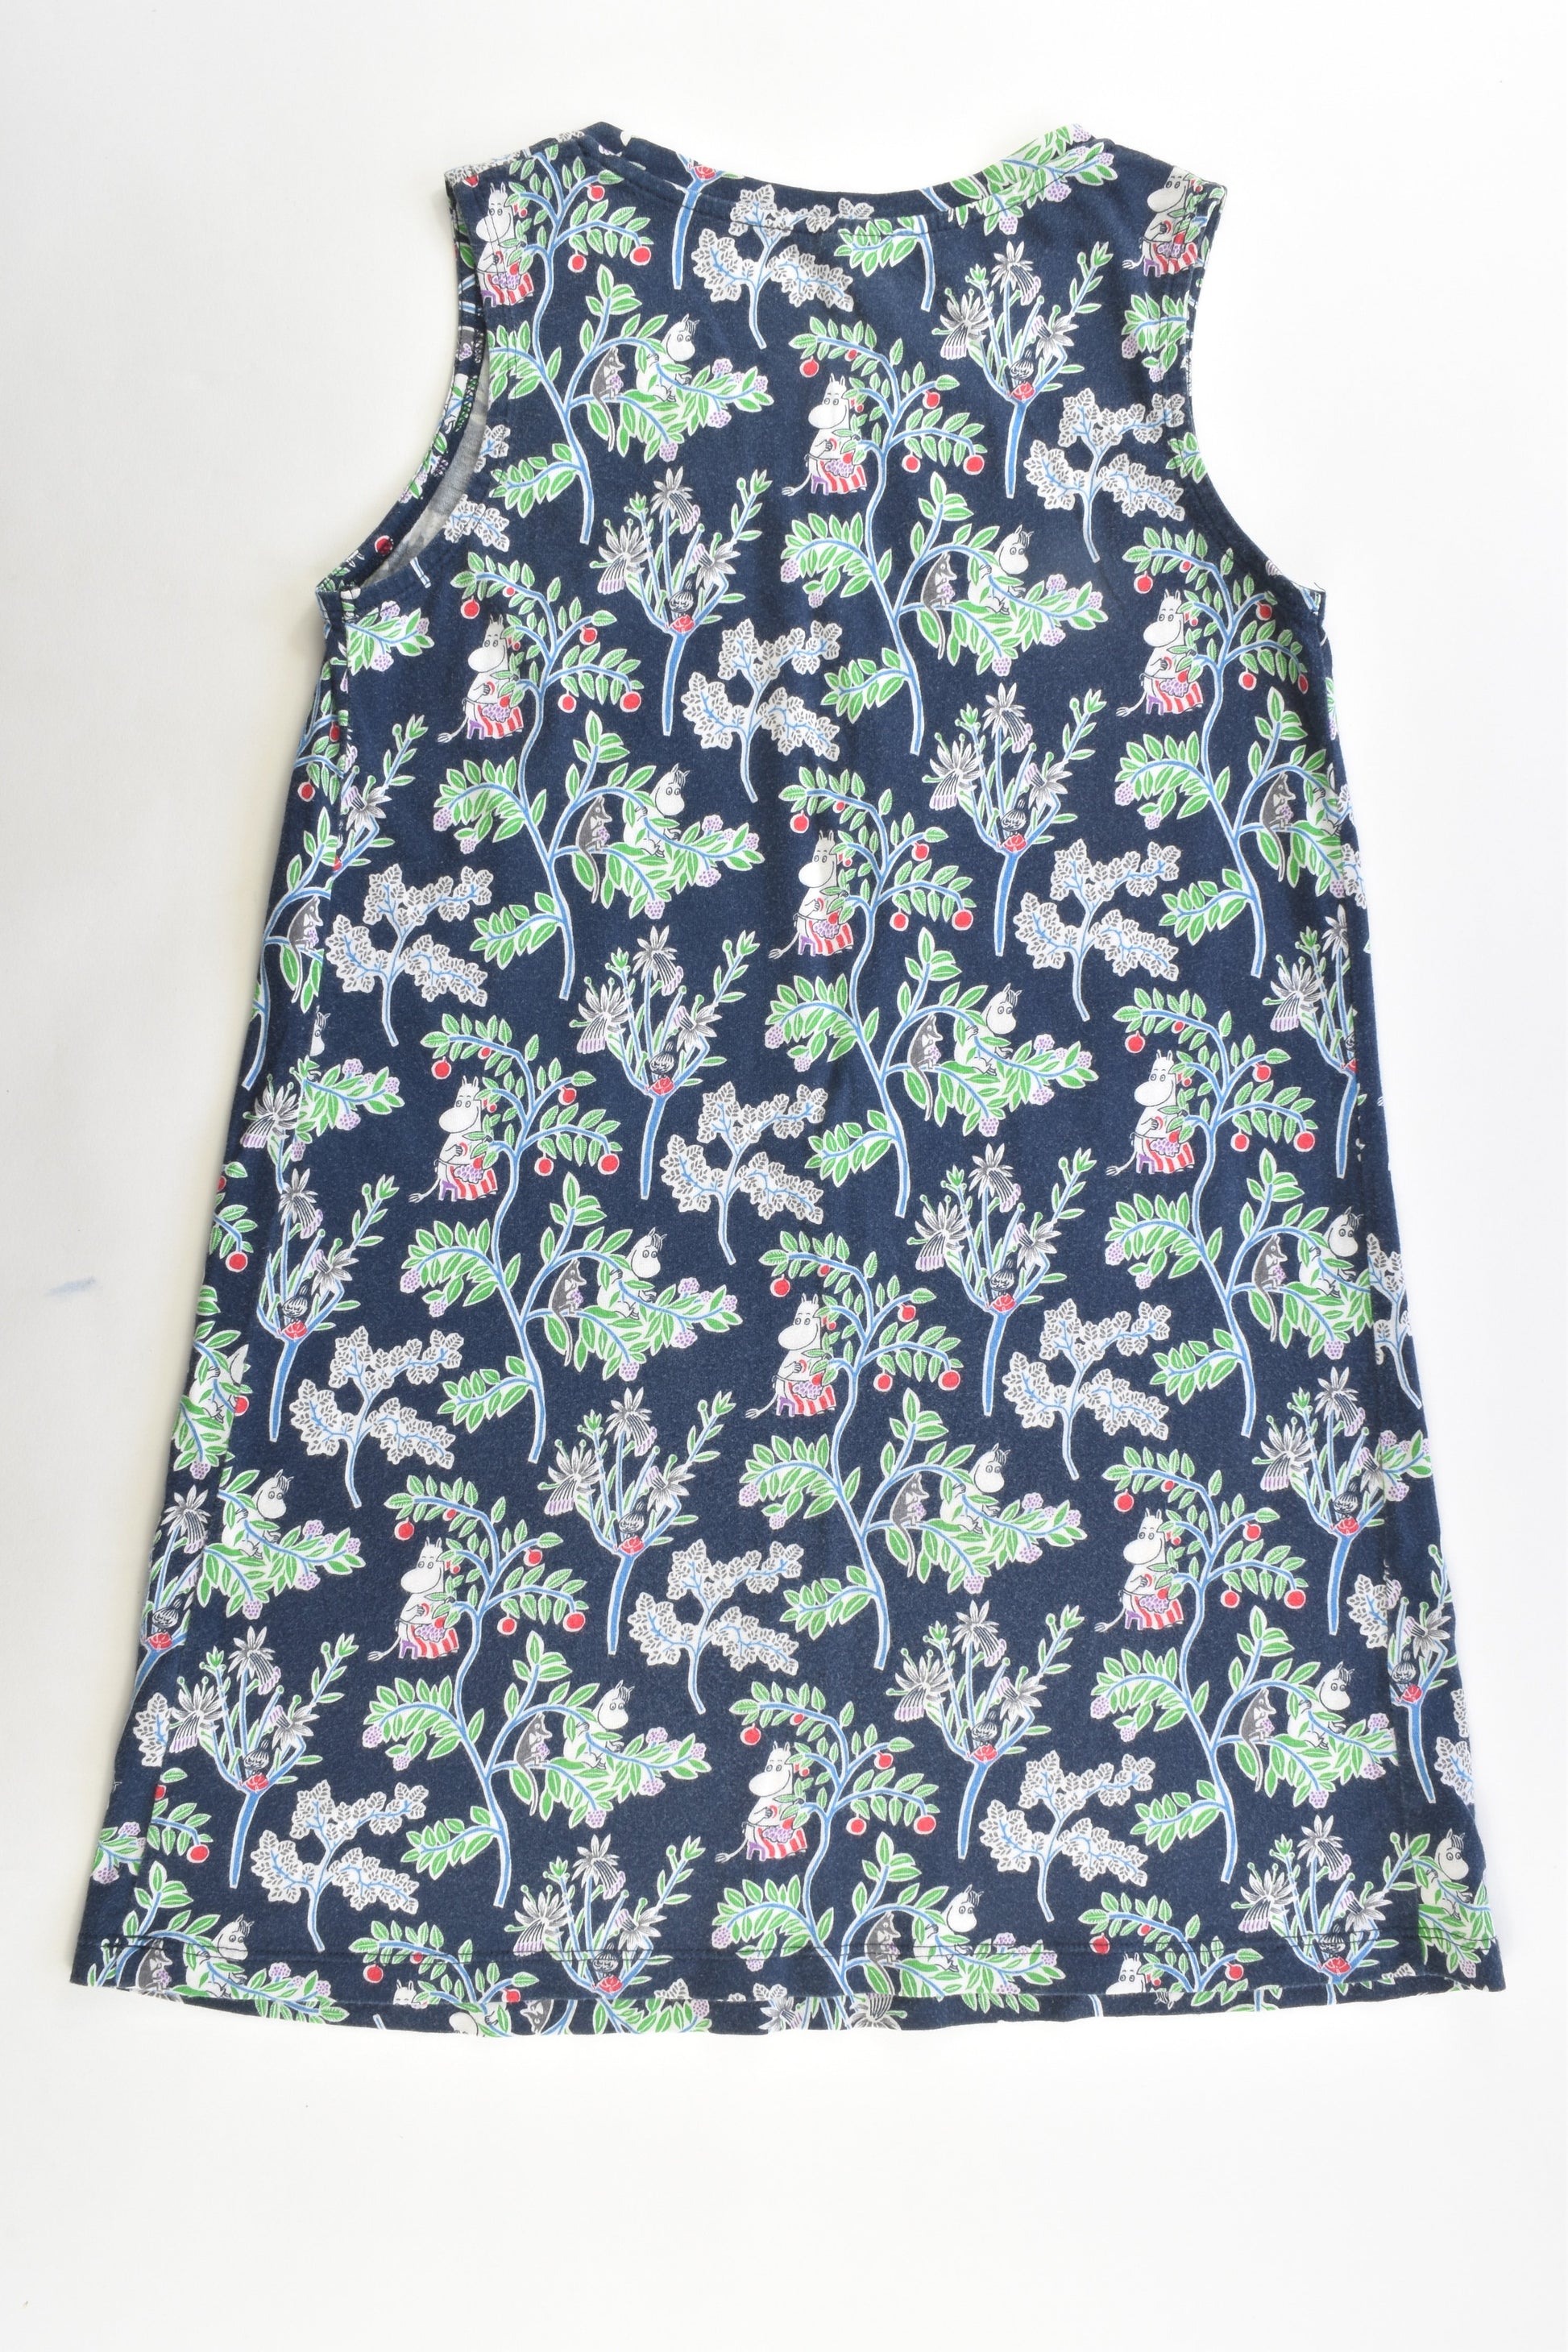 Moomin by Uniqlo Size 140 cm (Small sizing) Dress